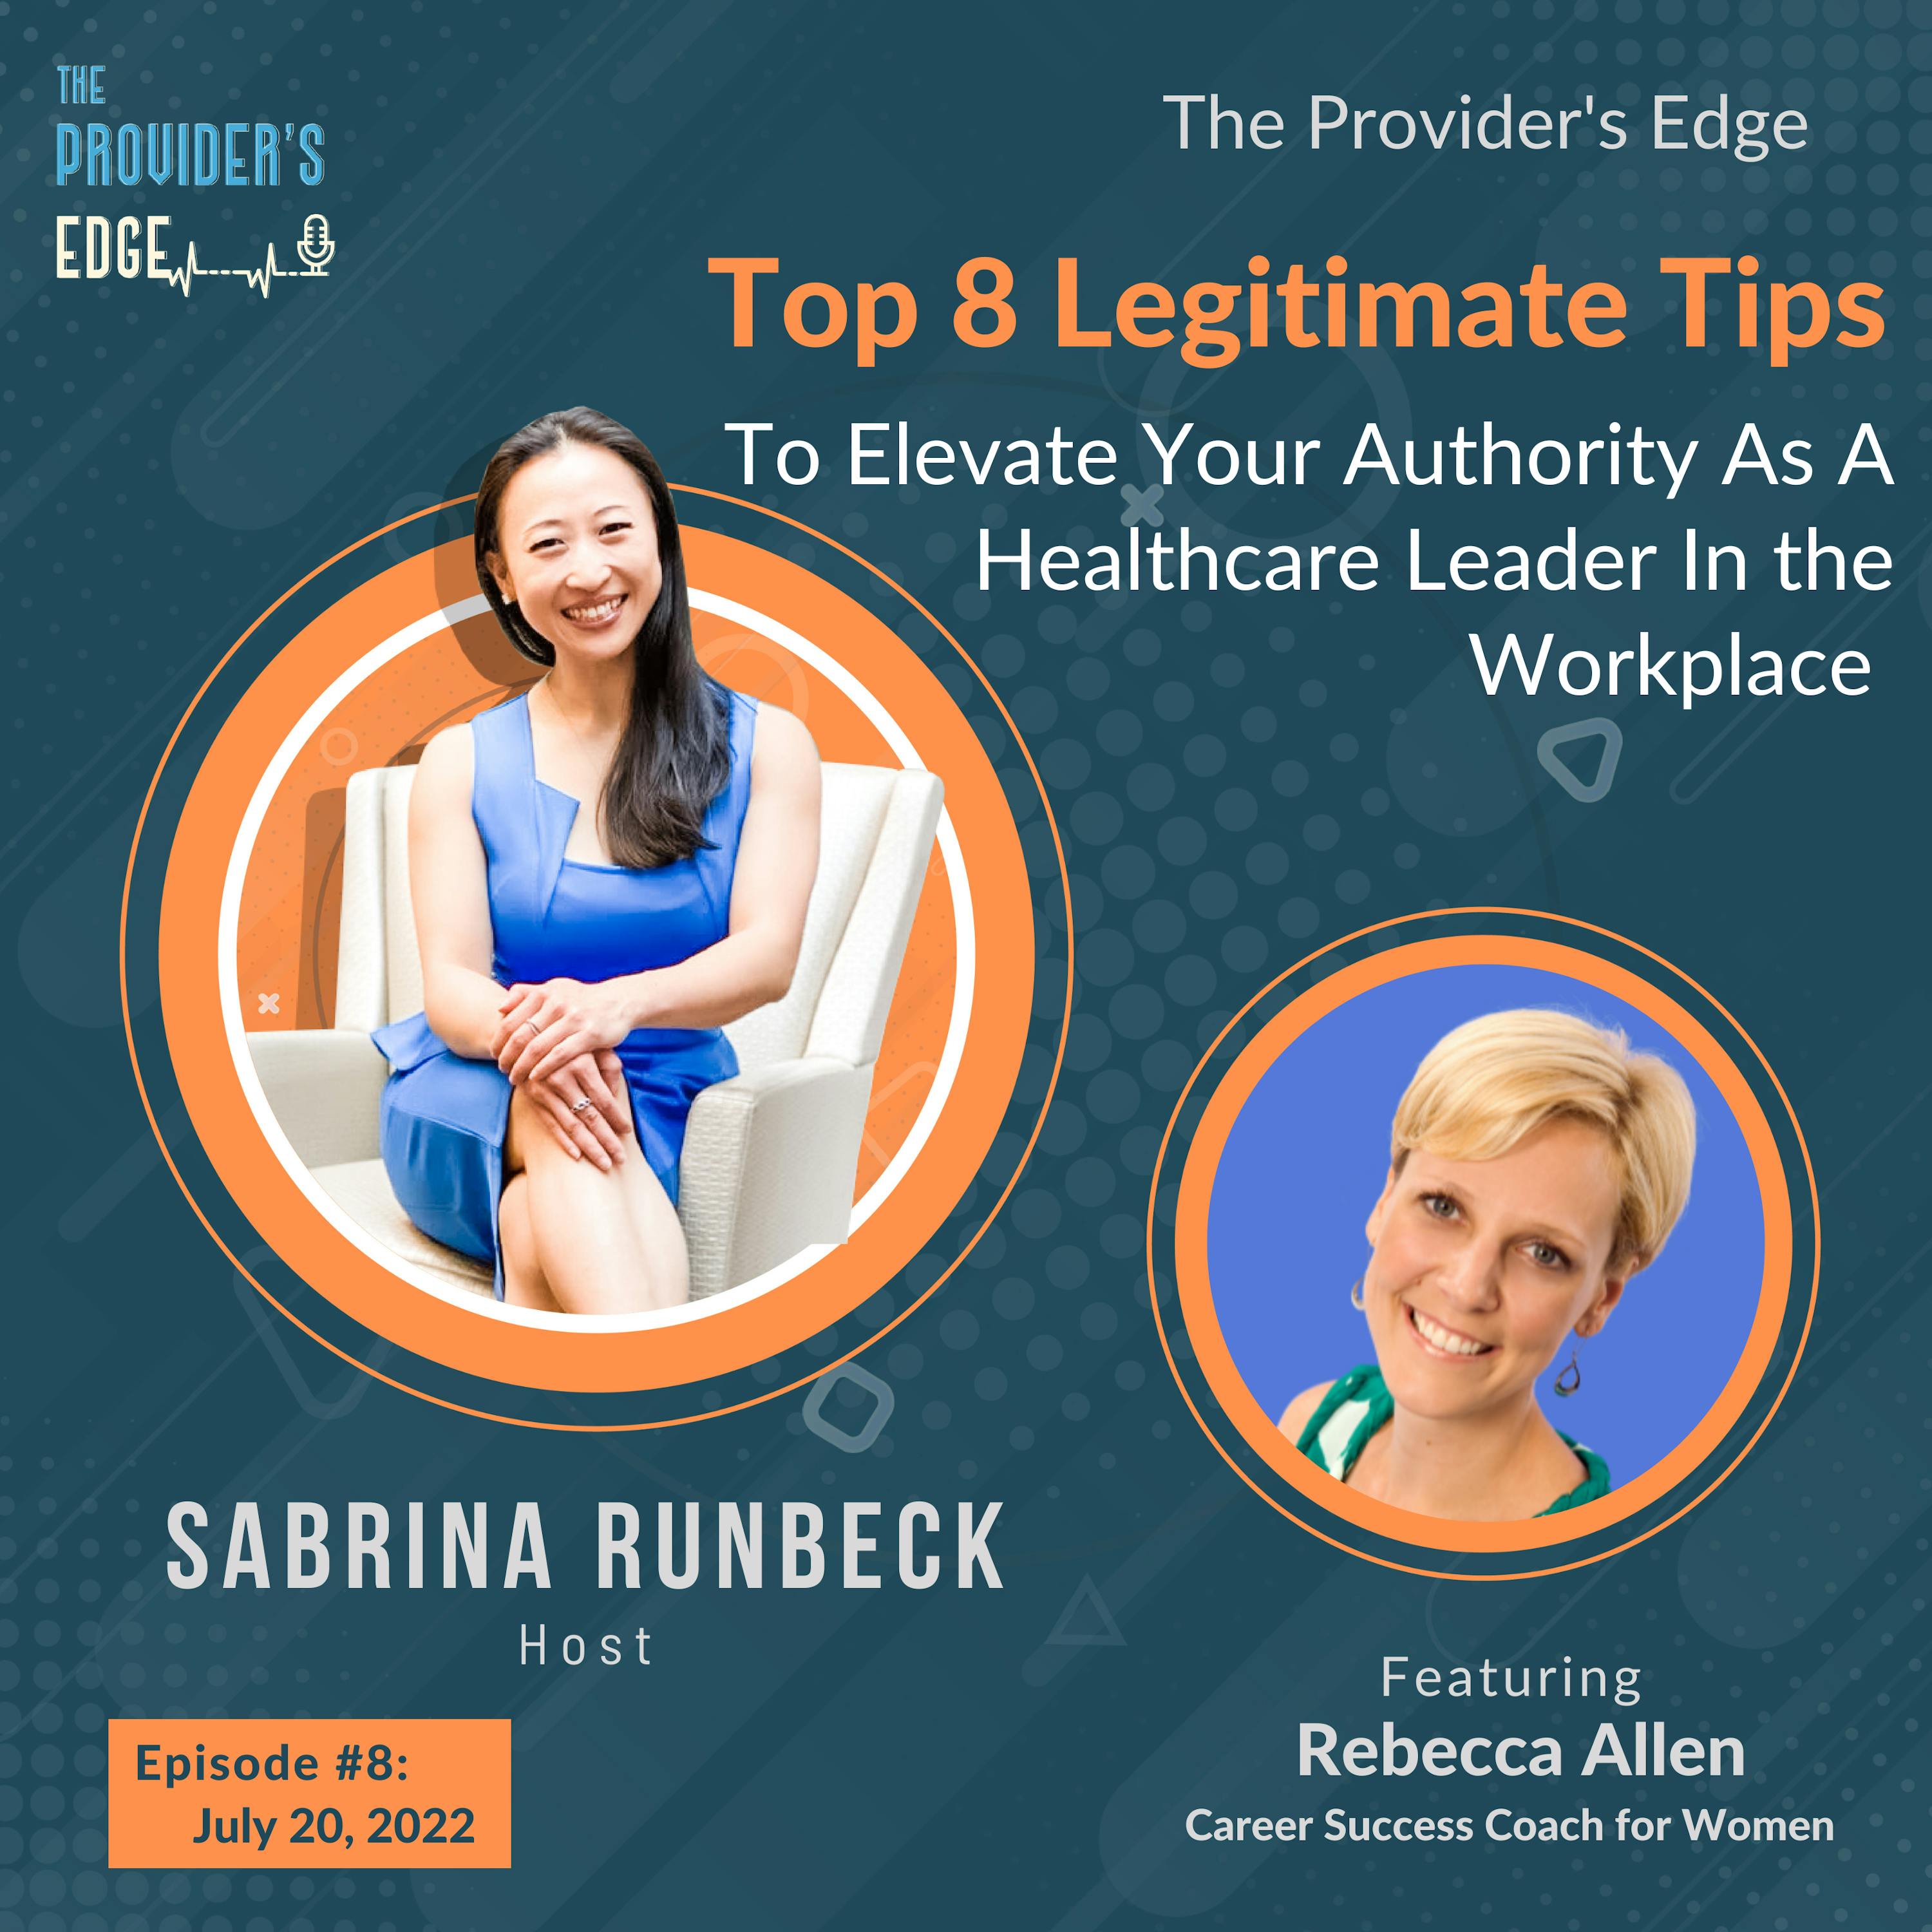 The Provider’s Edge: Top 8 Legitimate Tips To Elevate Your Authority As A Healthcare Leader In the Workplace